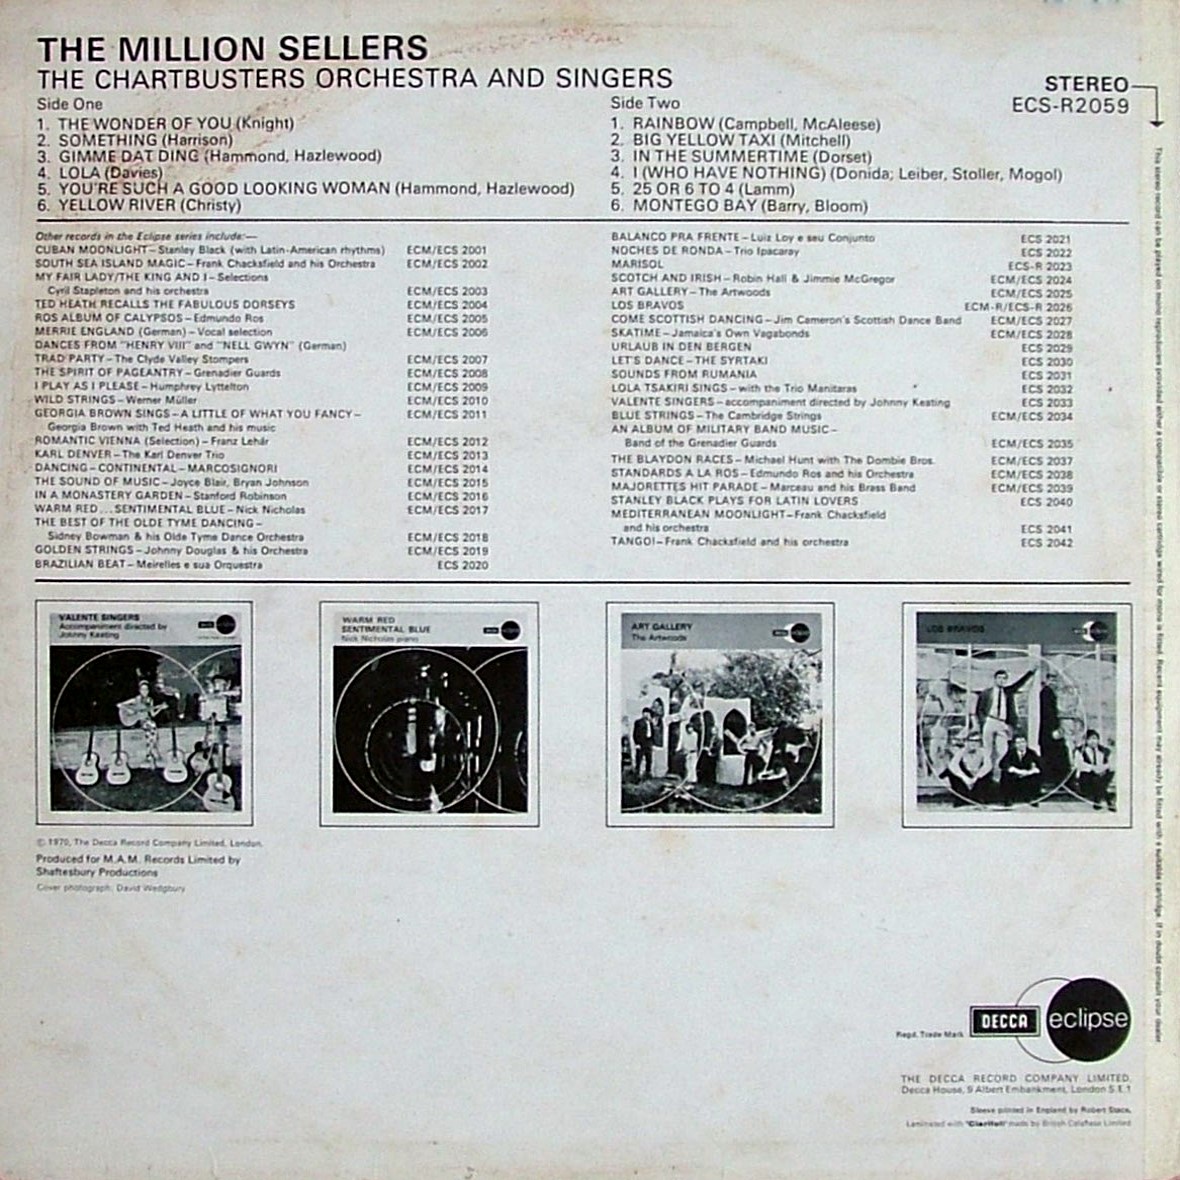 Copycat Cover Records: UK one-offs part 3: The Million Sellers